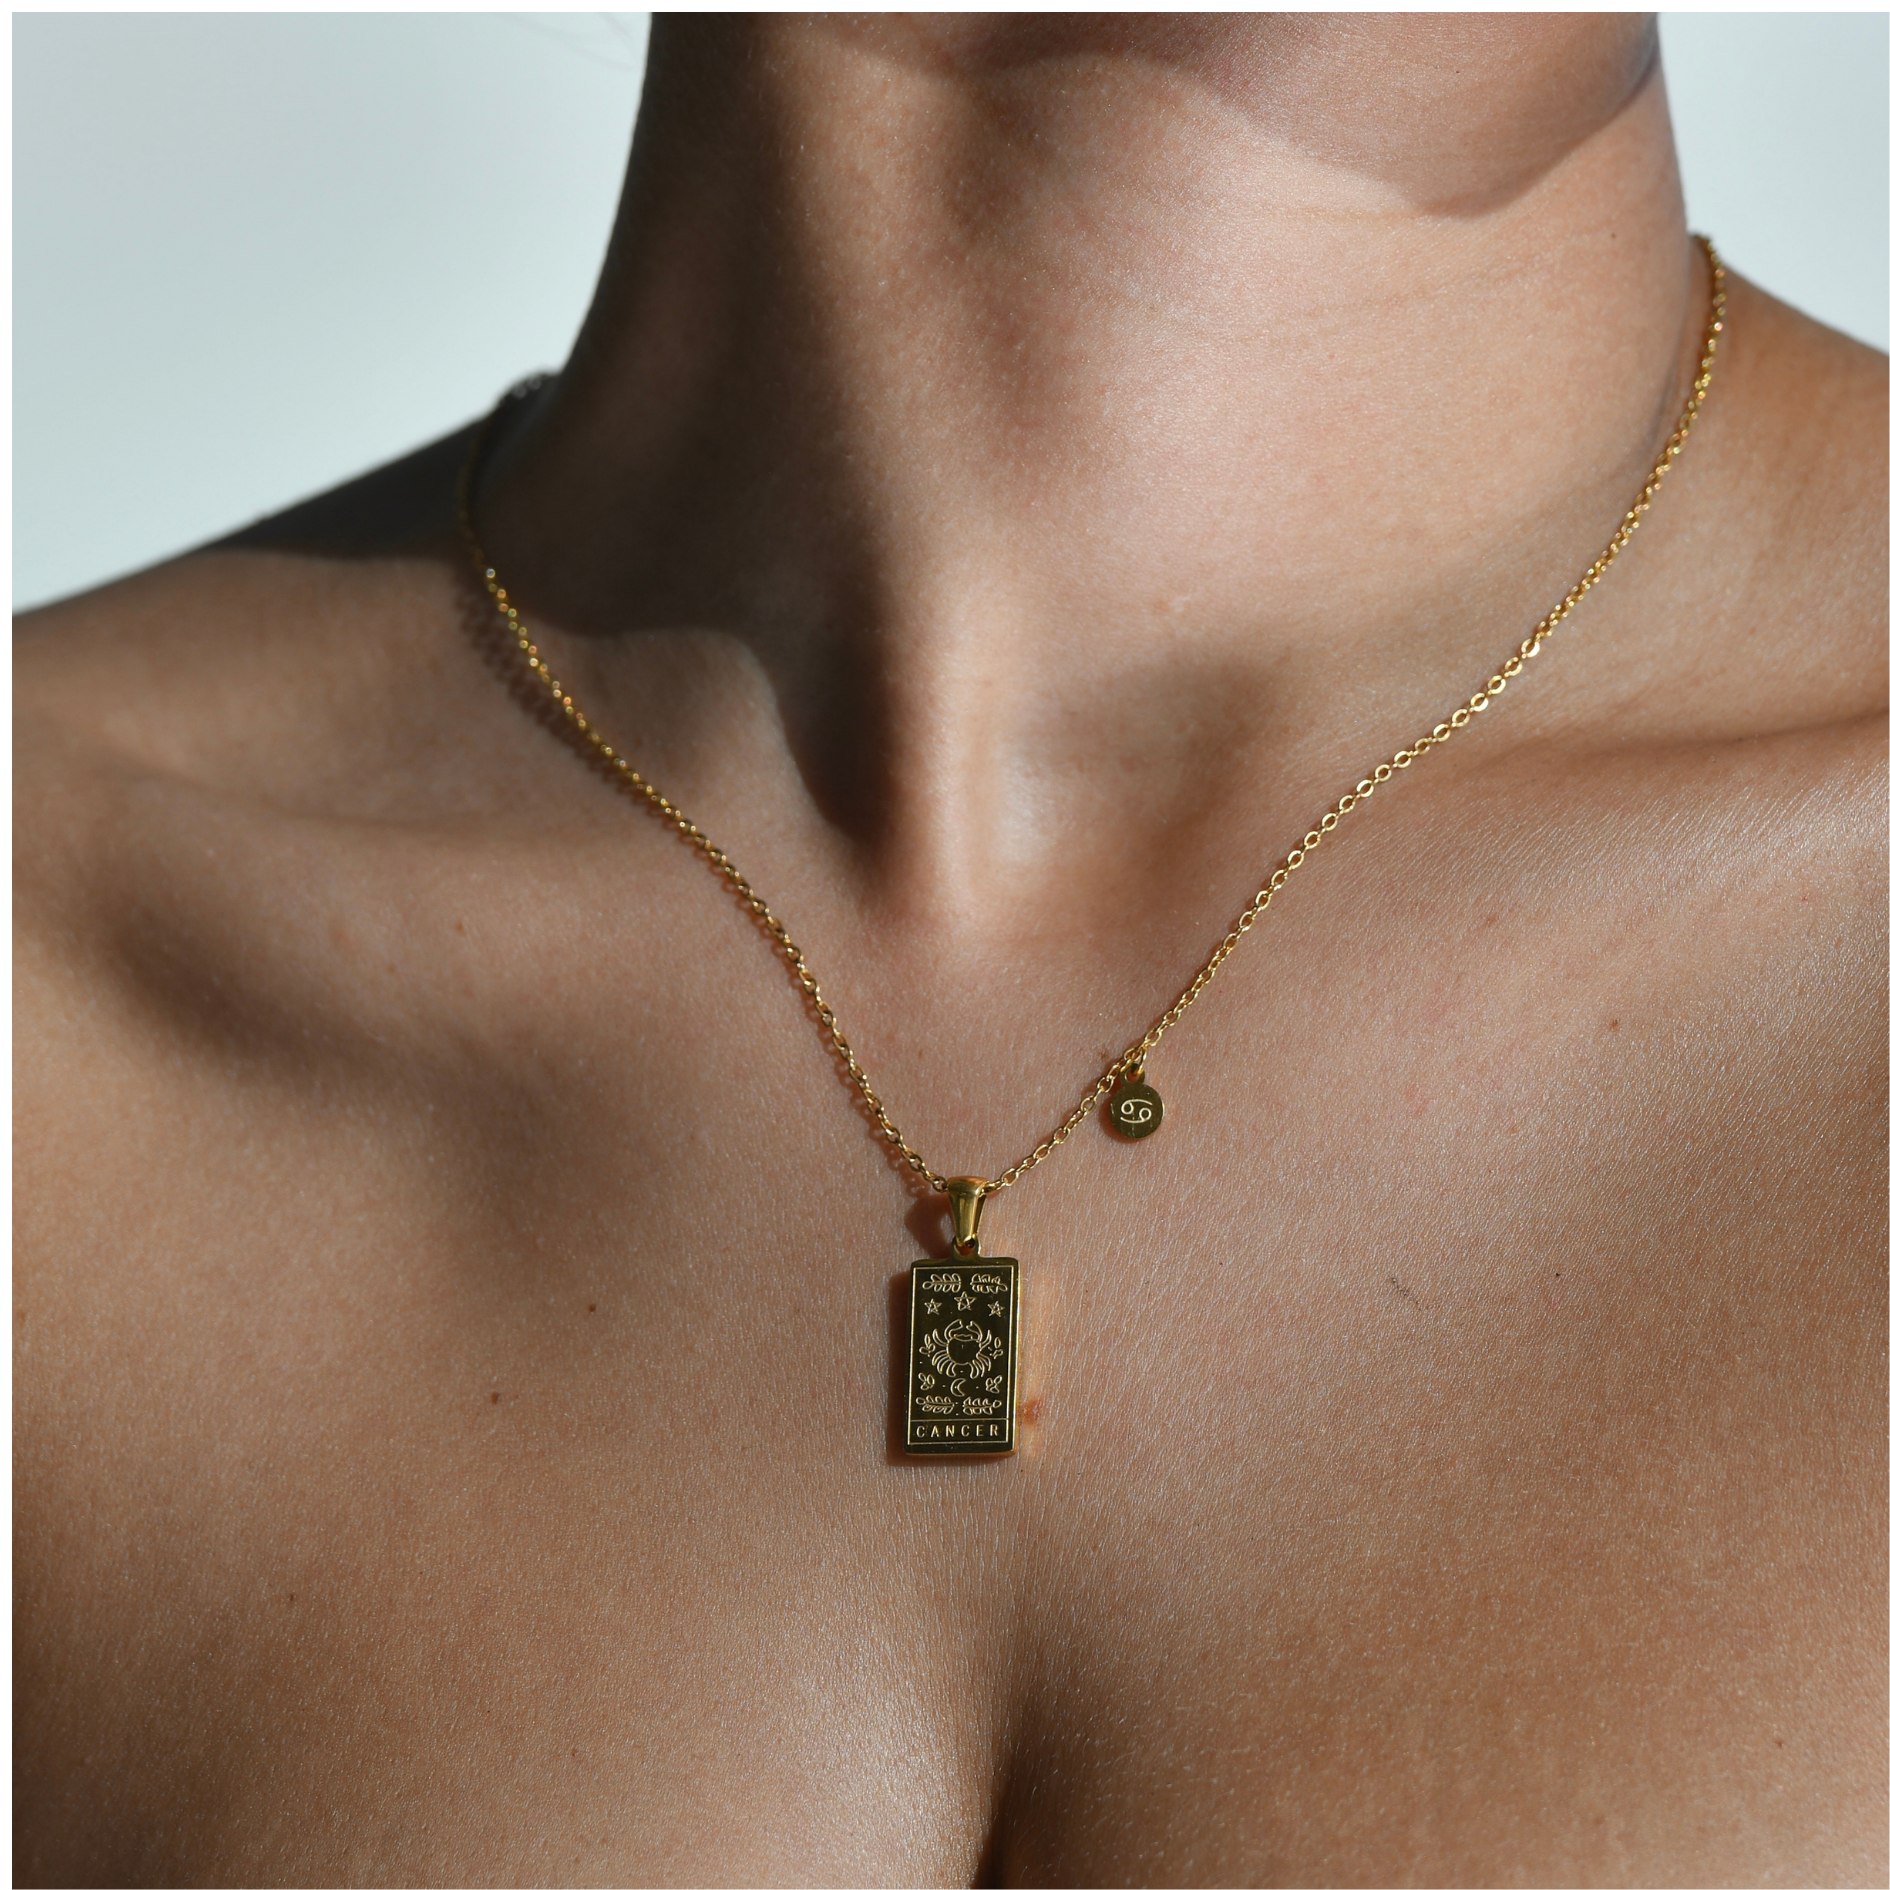 CANCER ZODIAC PENDANT GOLD NECKLACE gold pendant with a pendant hanging in a rectangular shape where the zodiac sign of the crab is engraved and the word crab is engraved at the bottom of the pendant. In the corner of the chain, next to the rectangular pendant, there is a small circle hanging with the symbol of the sign of the crab.